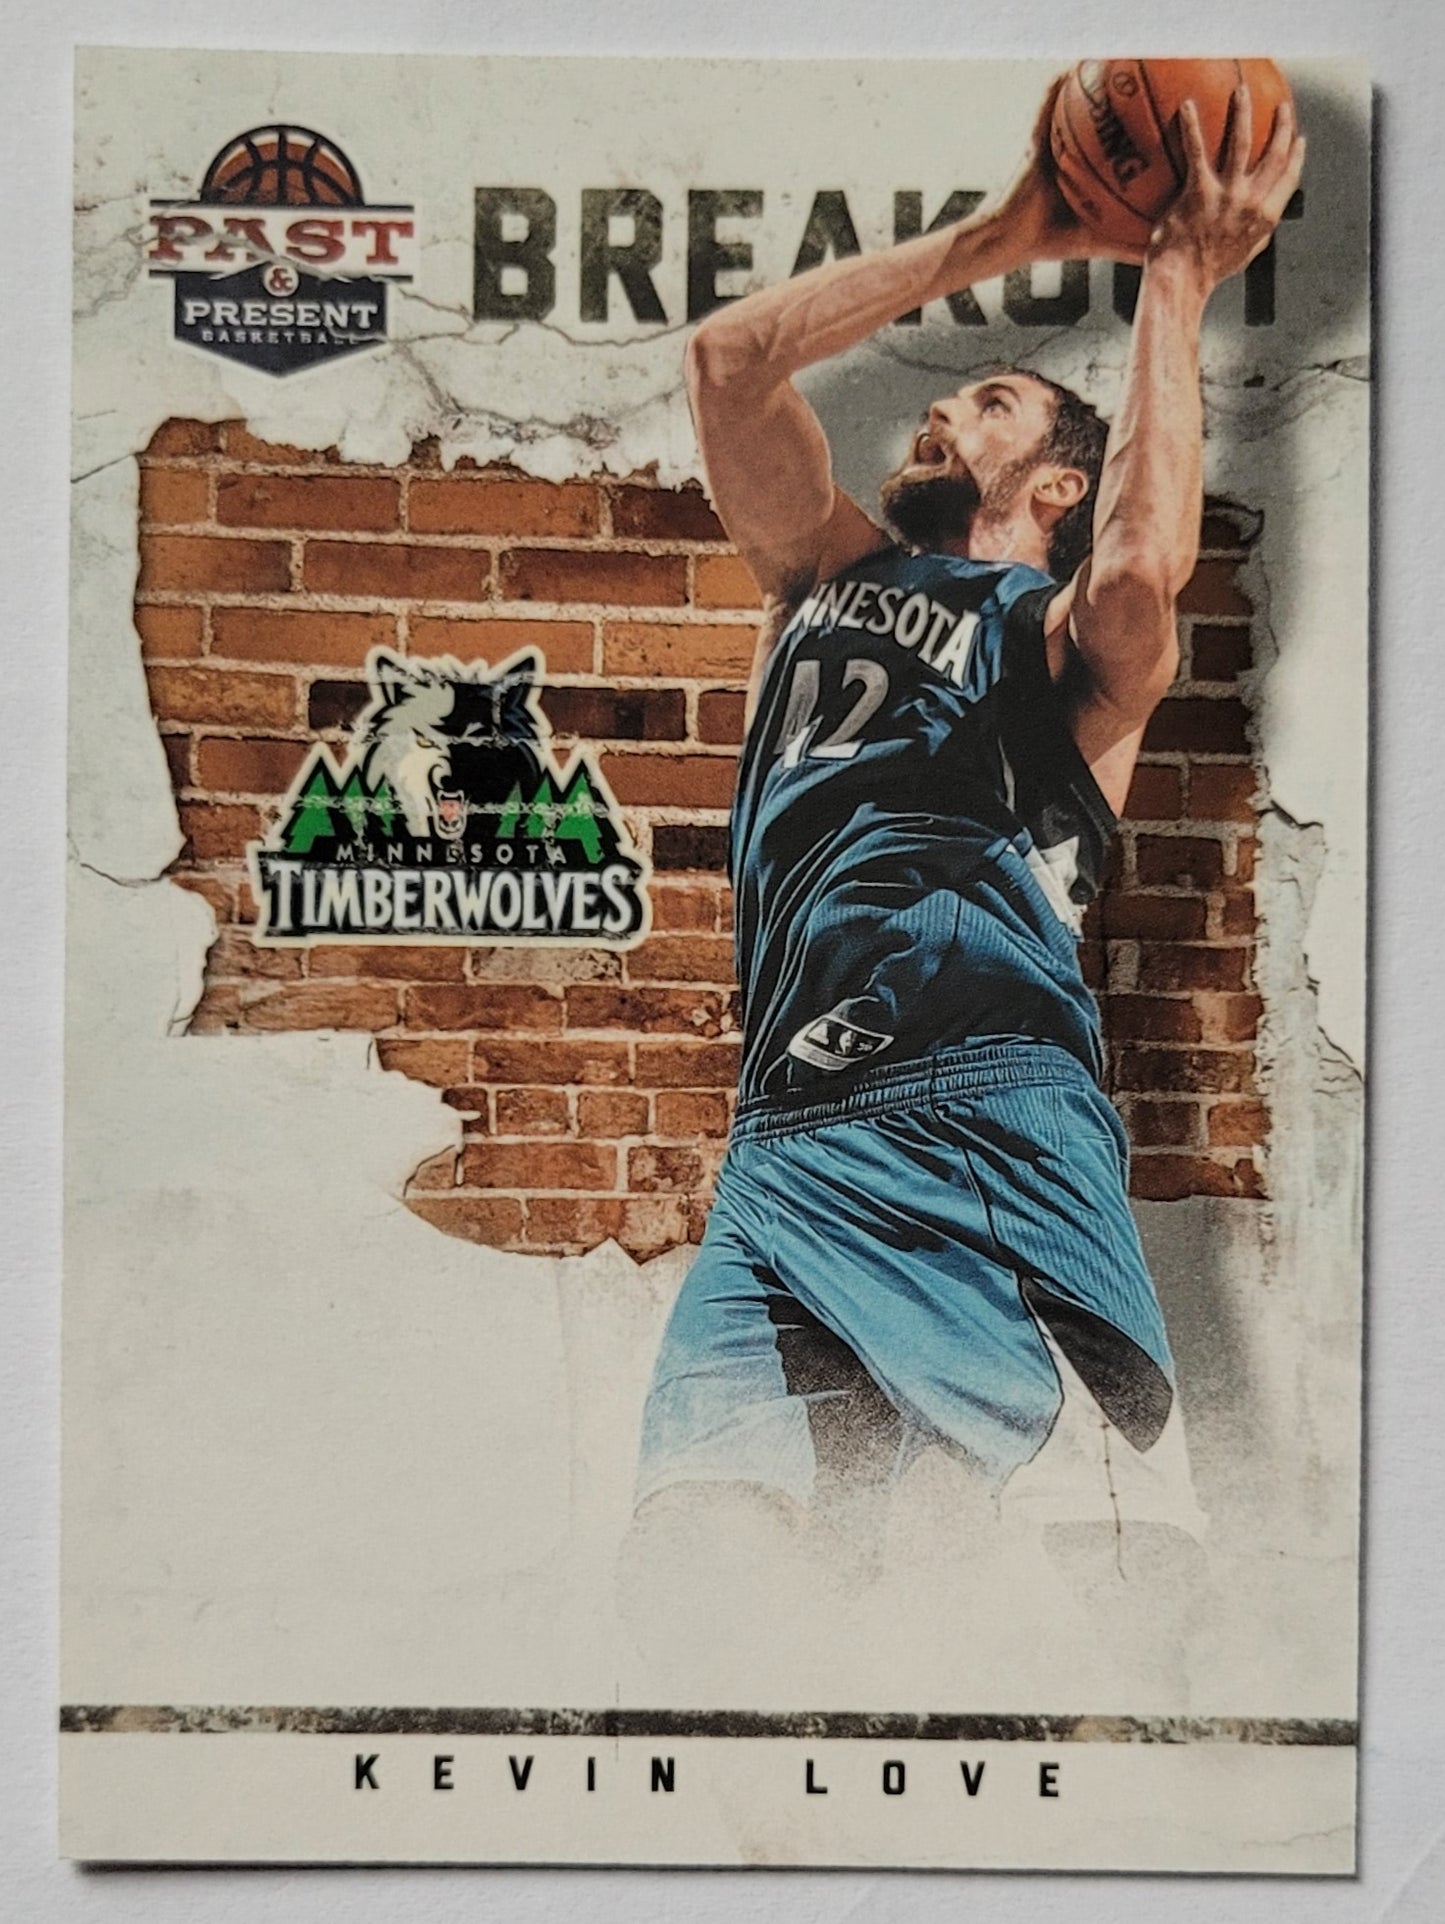 Kevin Love - 2011-12 Panini Past and Present Breakout #14